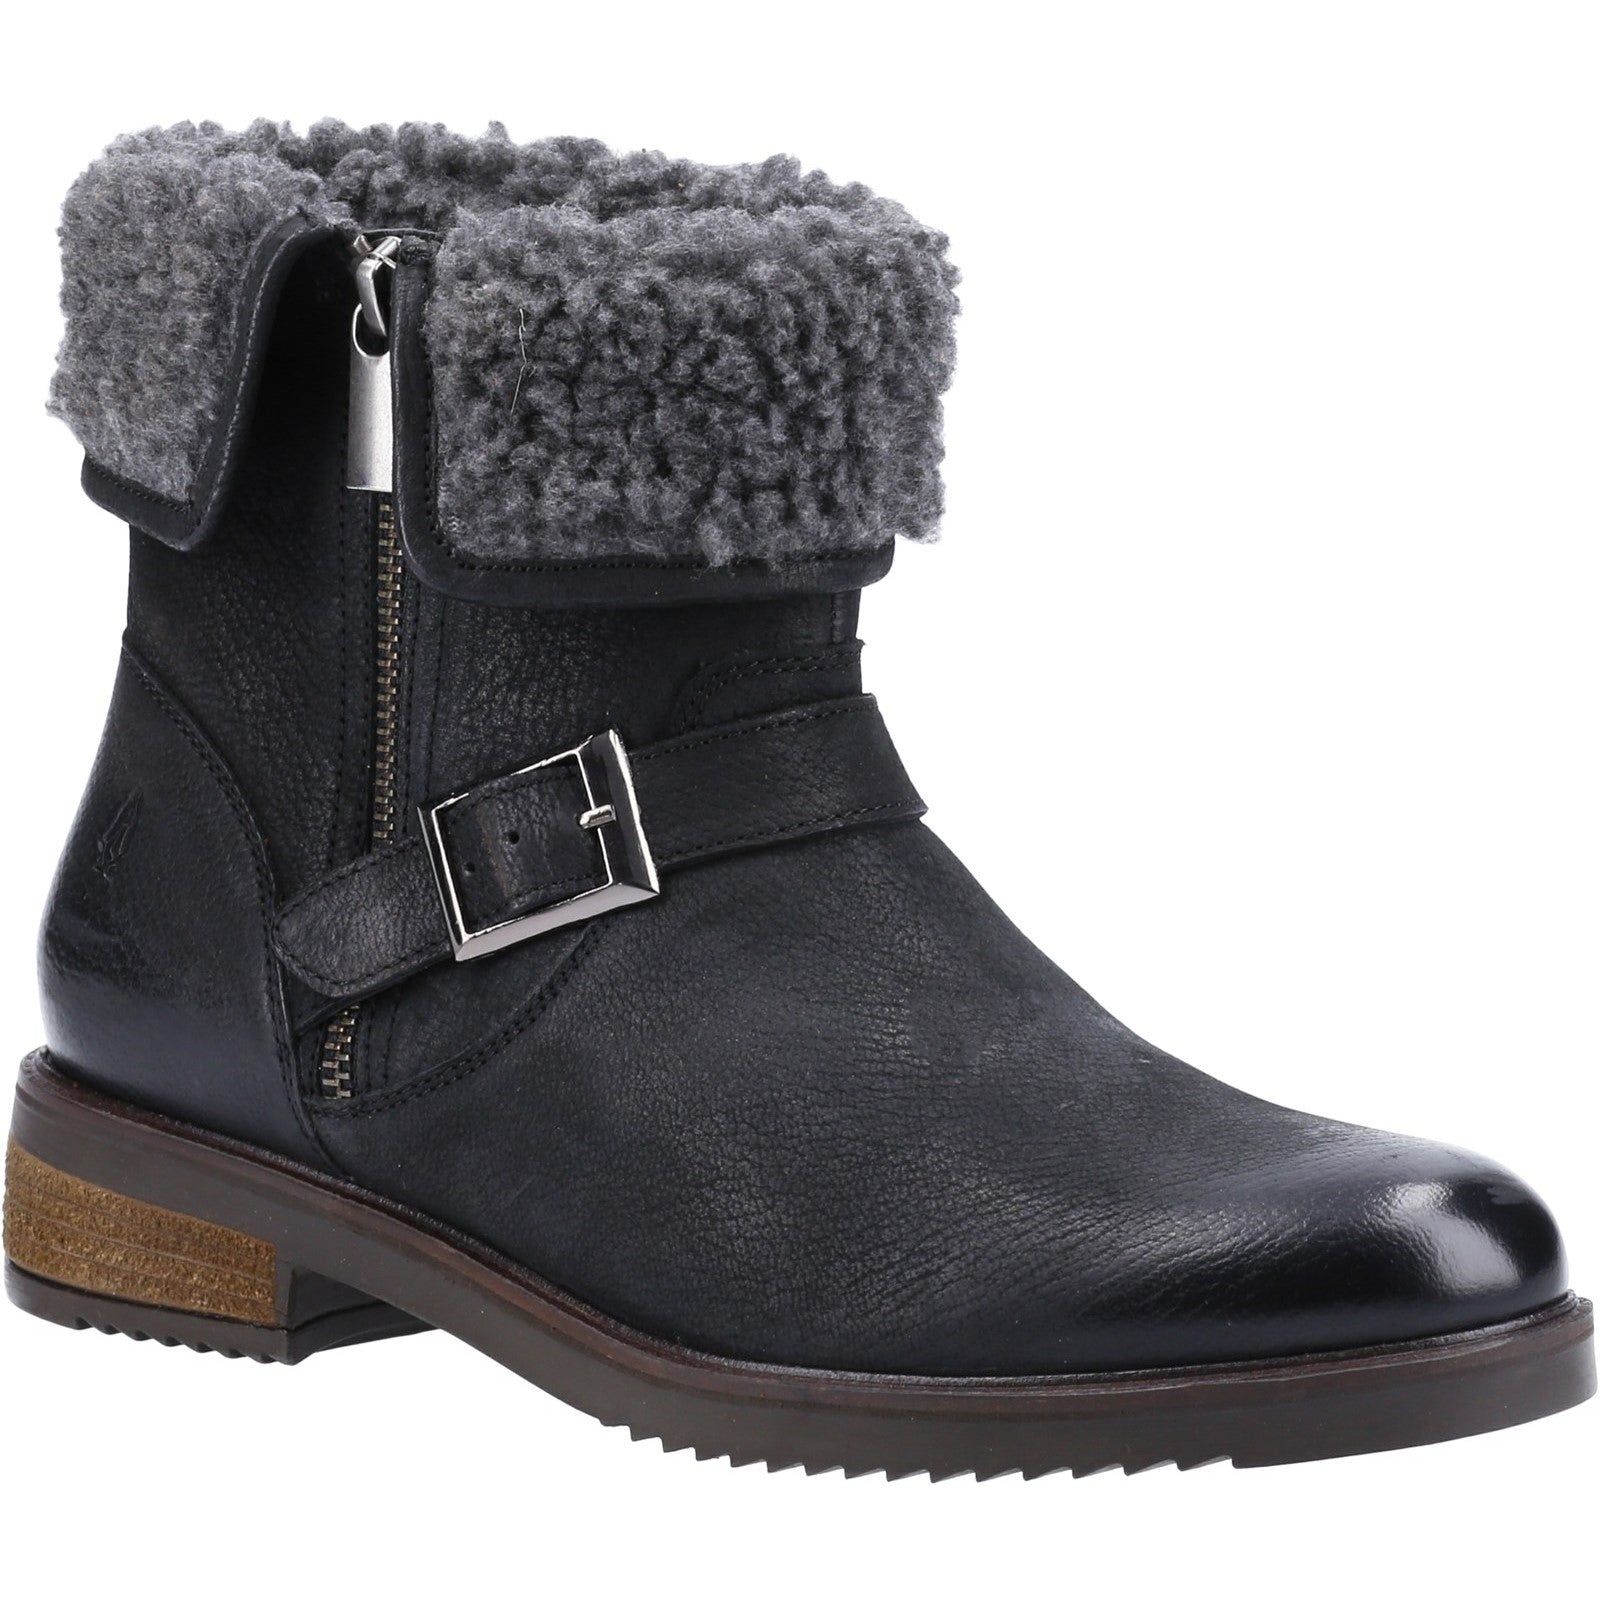 Ladies Mid Boot Black Hush Puppies Tyler Ankle Boot